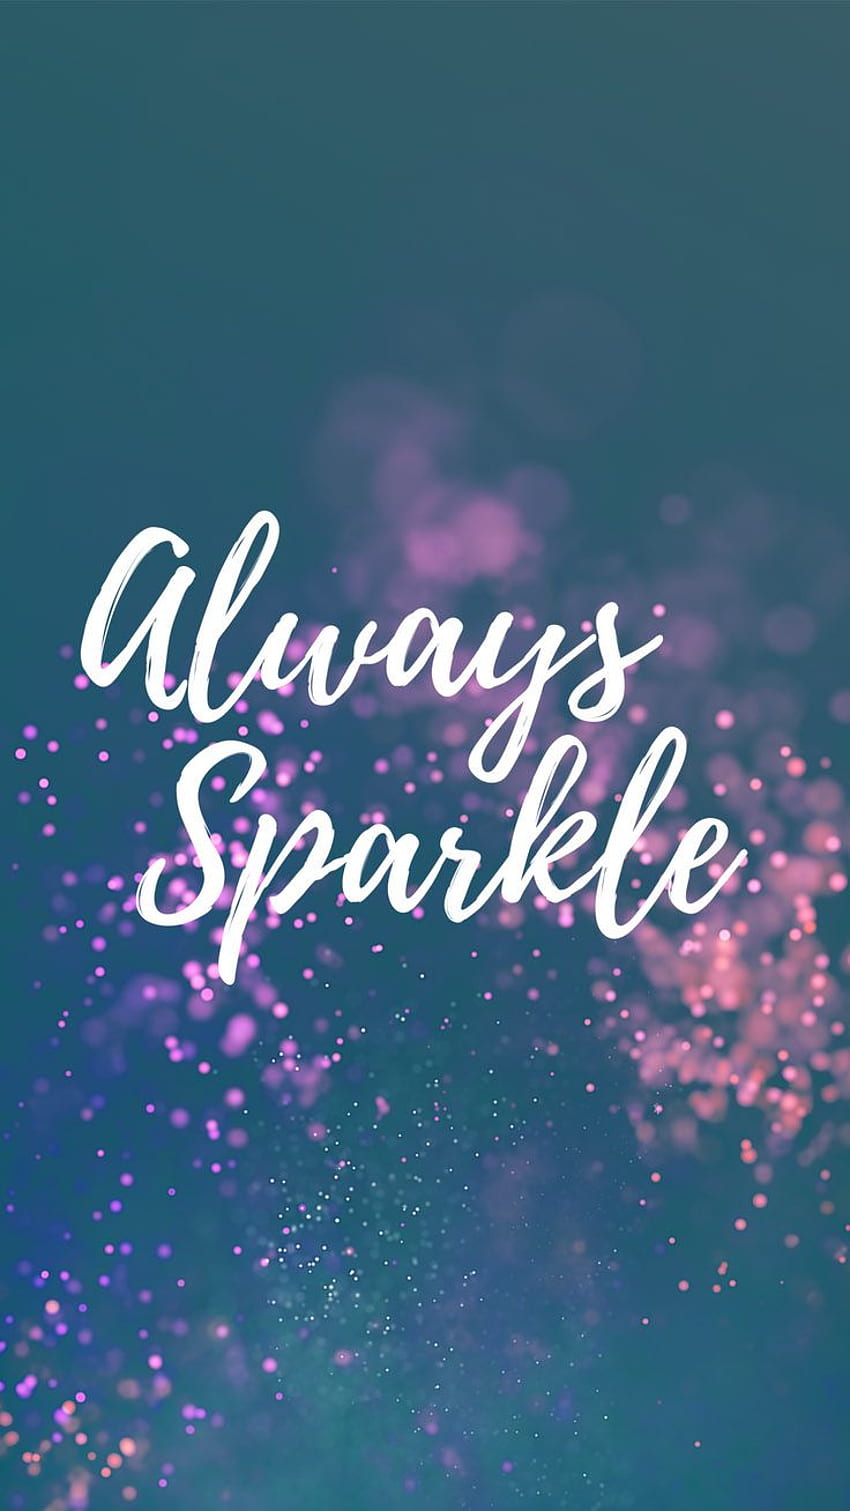 Inspirational Quotes IPhone Always Sparkle. Preppy, Sparkling Christmas HD phone wallpaper